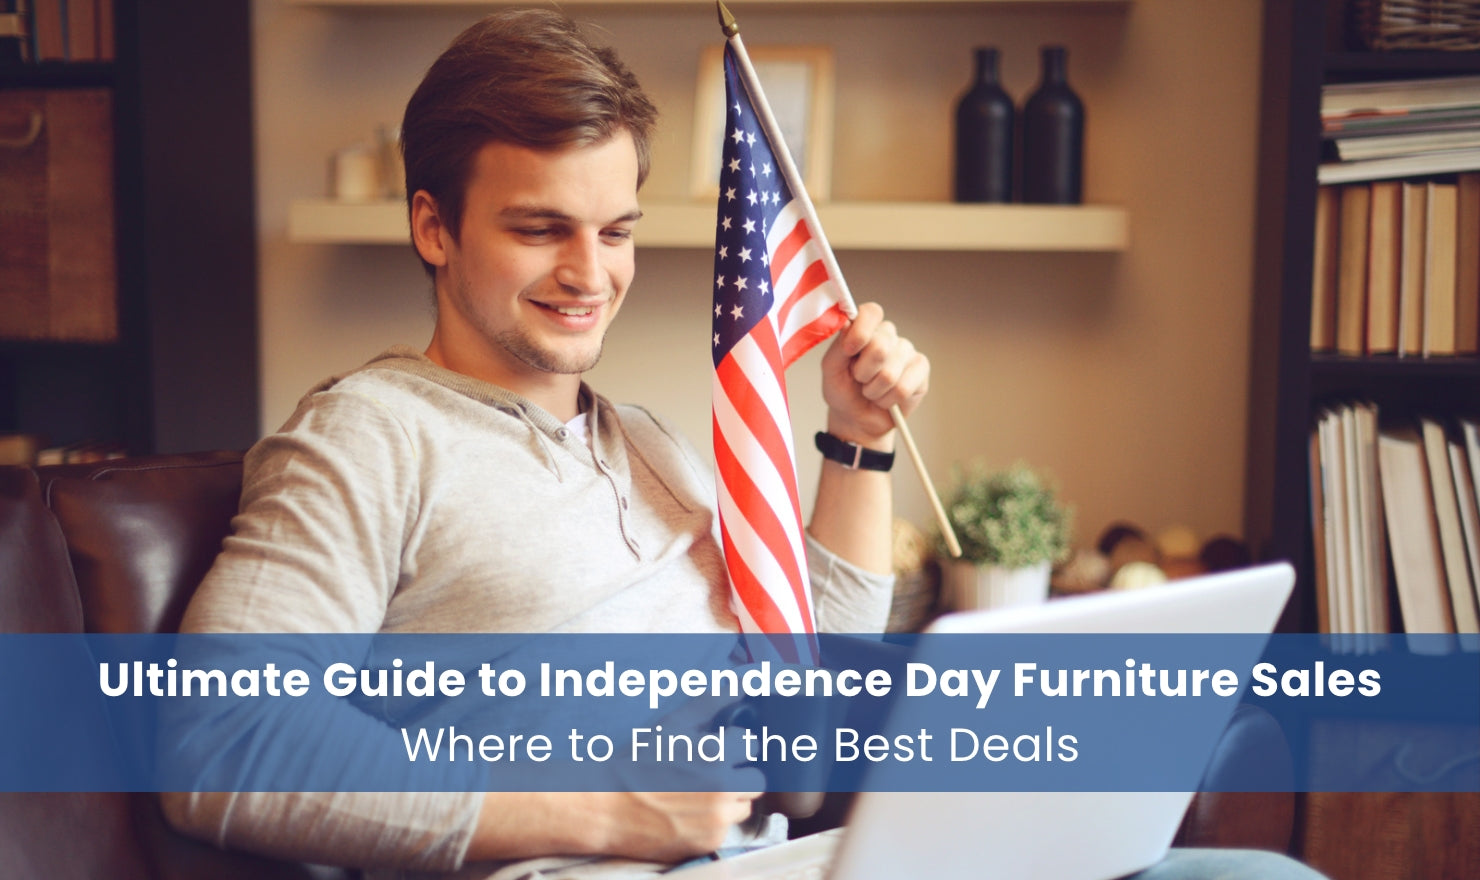 Ultimate Guide to Independence Day Furniture Sales